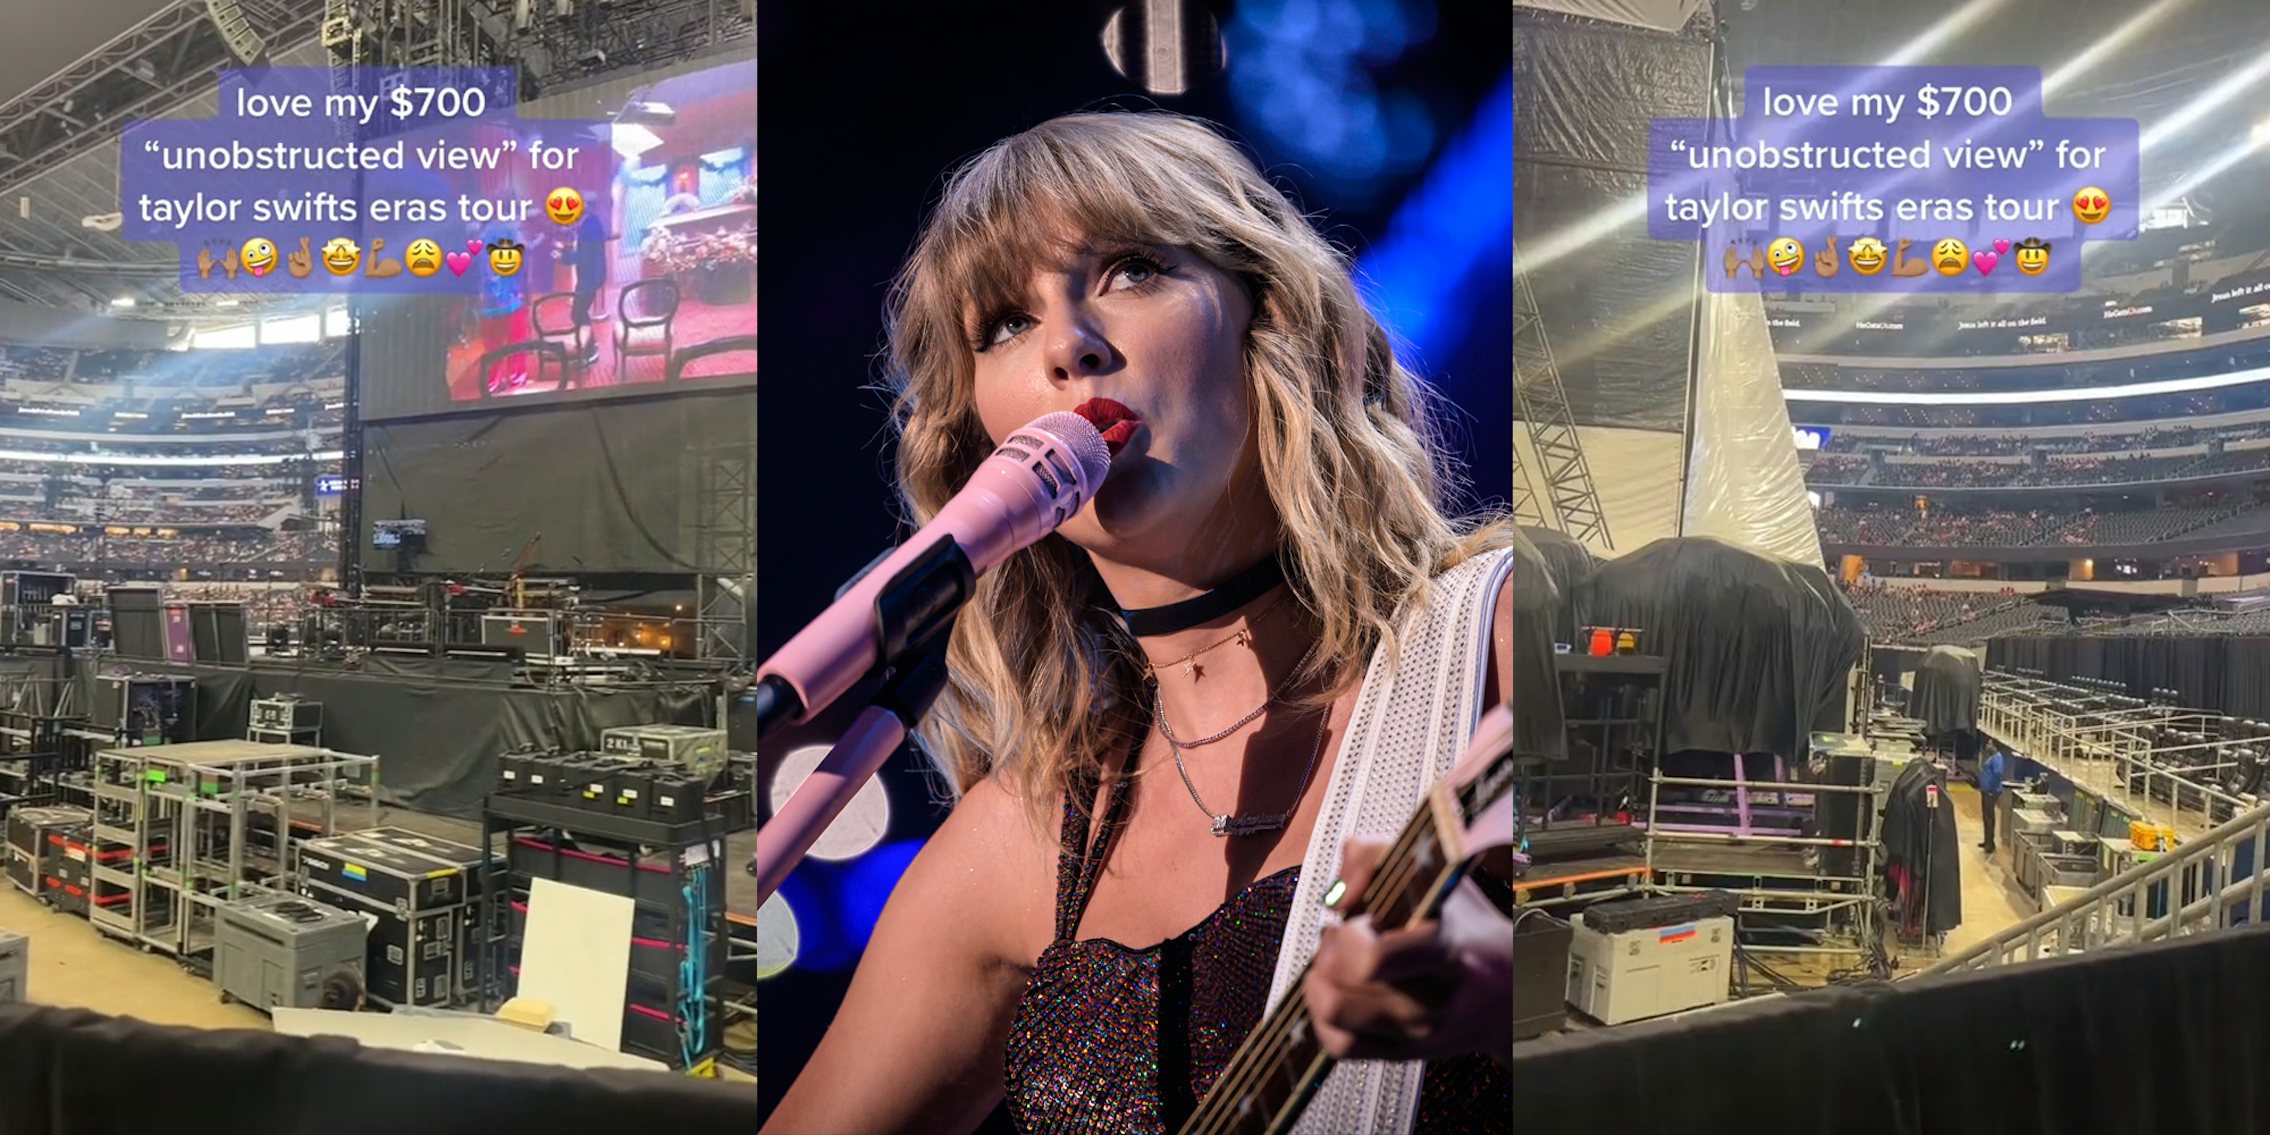 concert setup with caption 'love my $700 'unobstructed view' for taylor swifts eras tour' (l) Taylor Swift singing into pink microphone in front of dark background (c) concert setup with caption 'love my $700 'unobstructed view' for taylor swifts eras tour' (r)